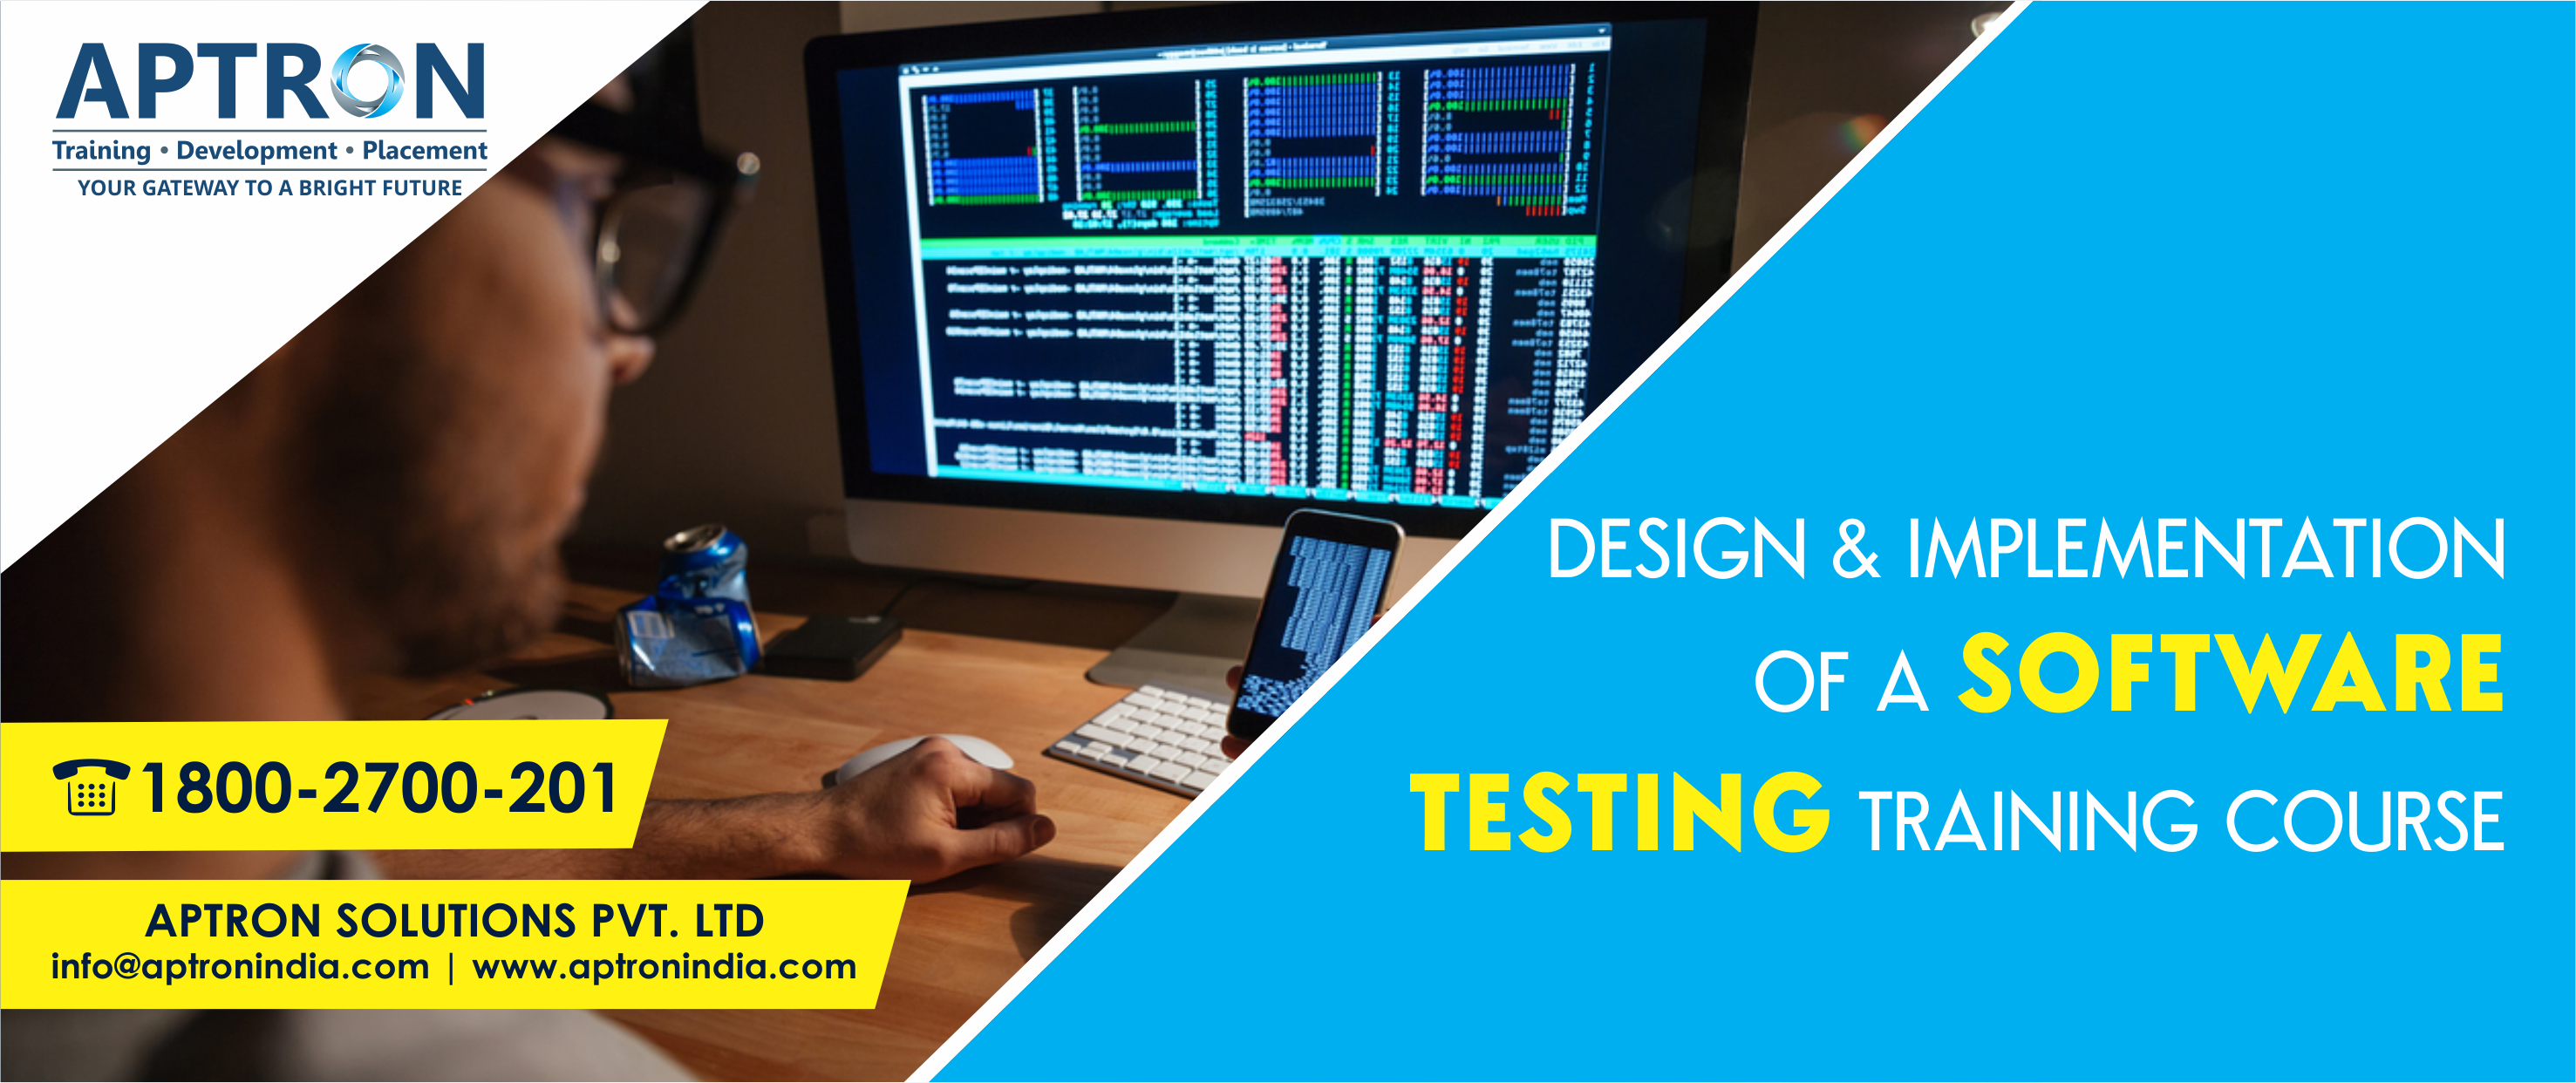 Design and Implementation of a Software Testing Training Course